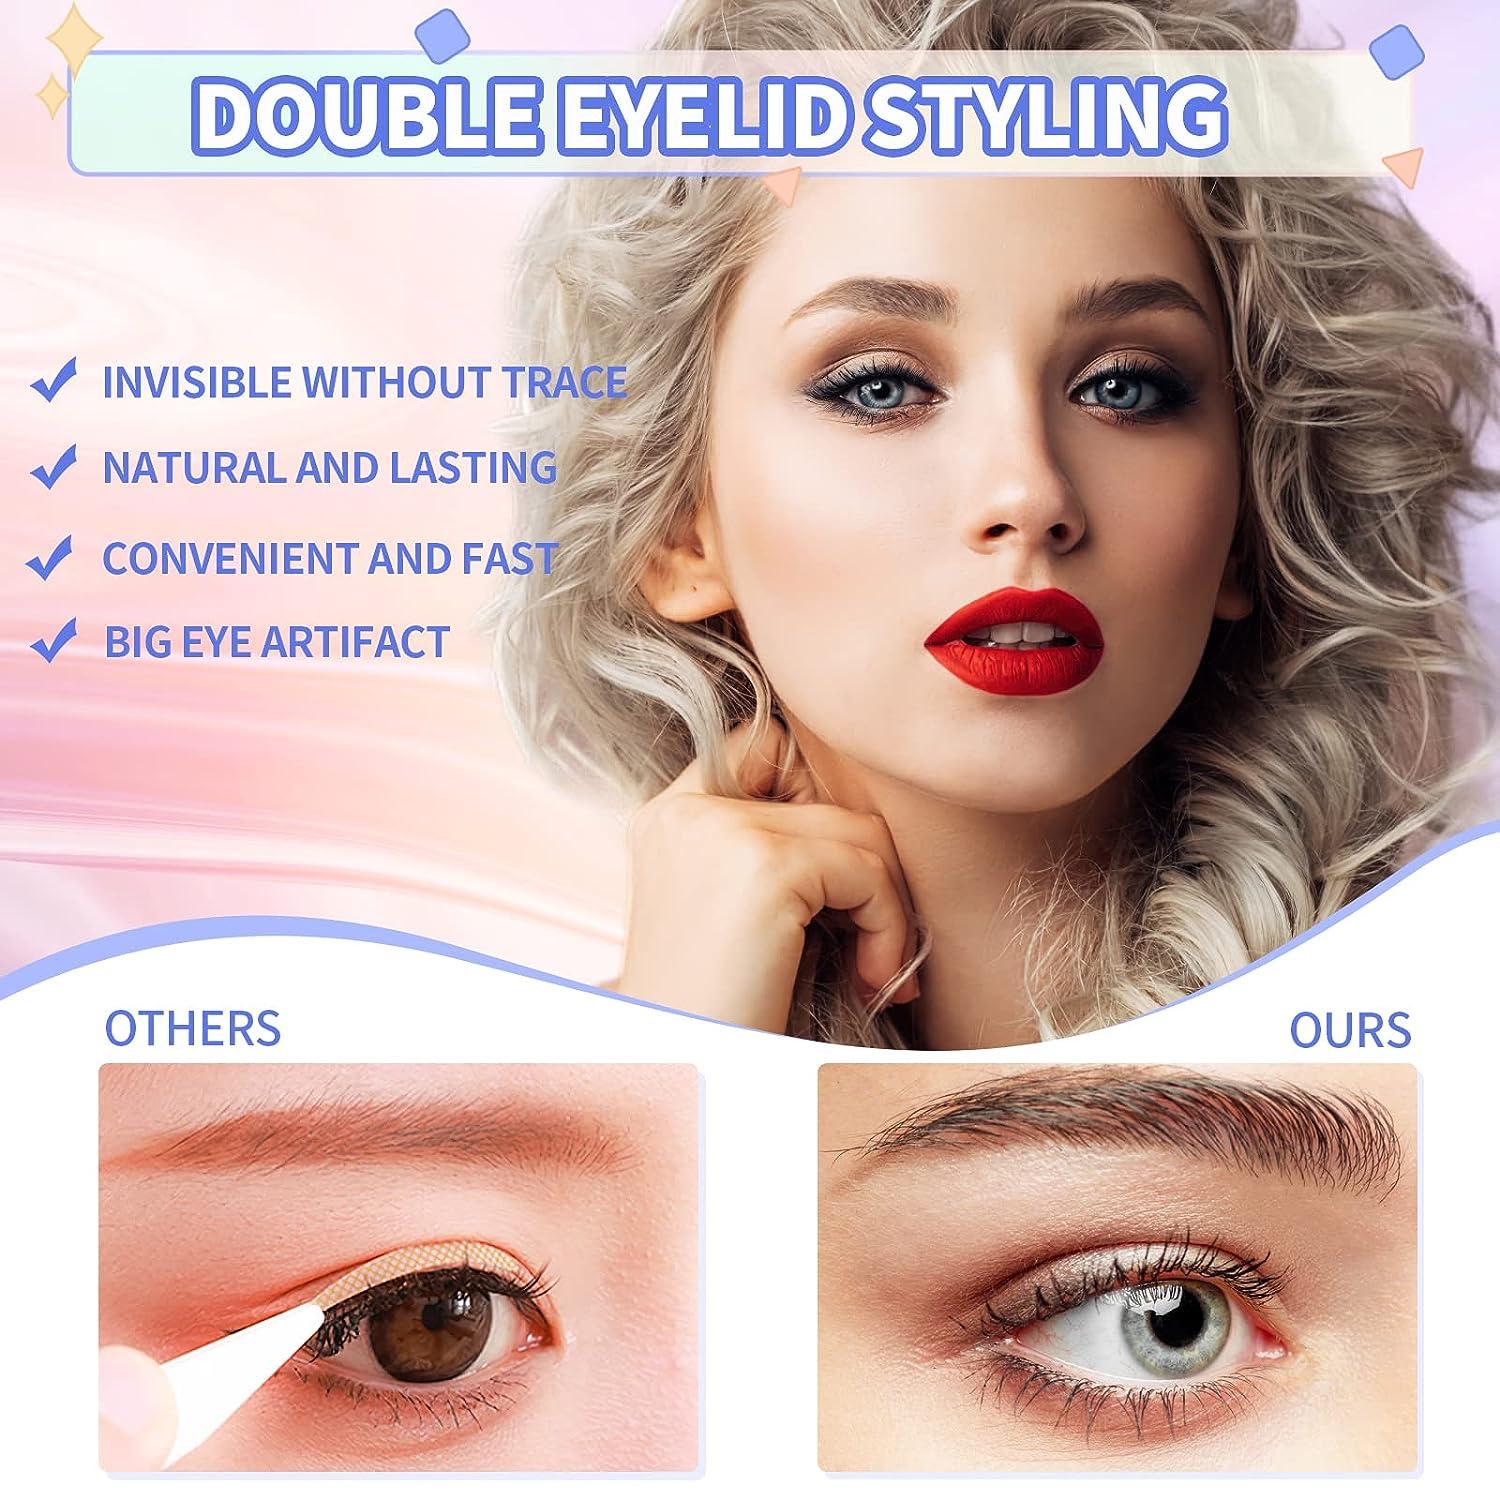 Eyelid Tape(480 PCS) 3 Types Waterproof Eyelid Lifter Strips with Double  Eyelid Styling Cream & Y-Fork Rods & Tweezers Double Eyelid Tape for Hooded  Droopy Uneven Mono-Eyelids (480 PCS)